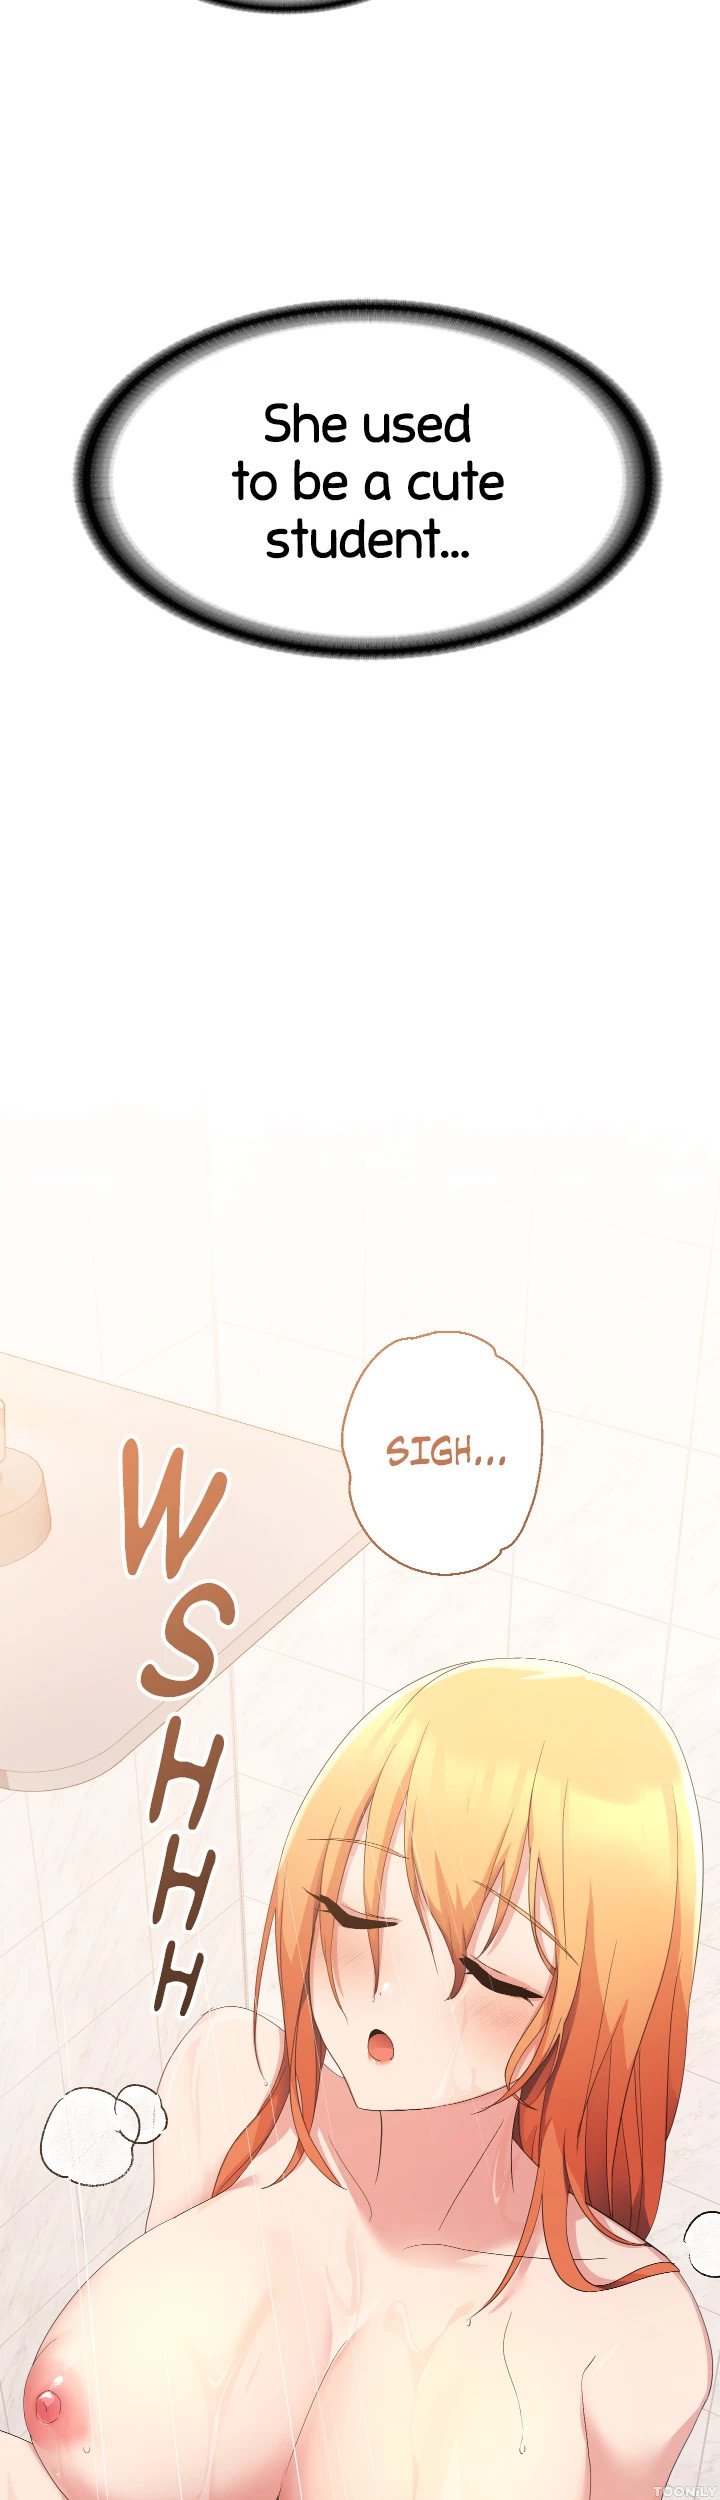 girls-i-used-to-teach-chap-3-27